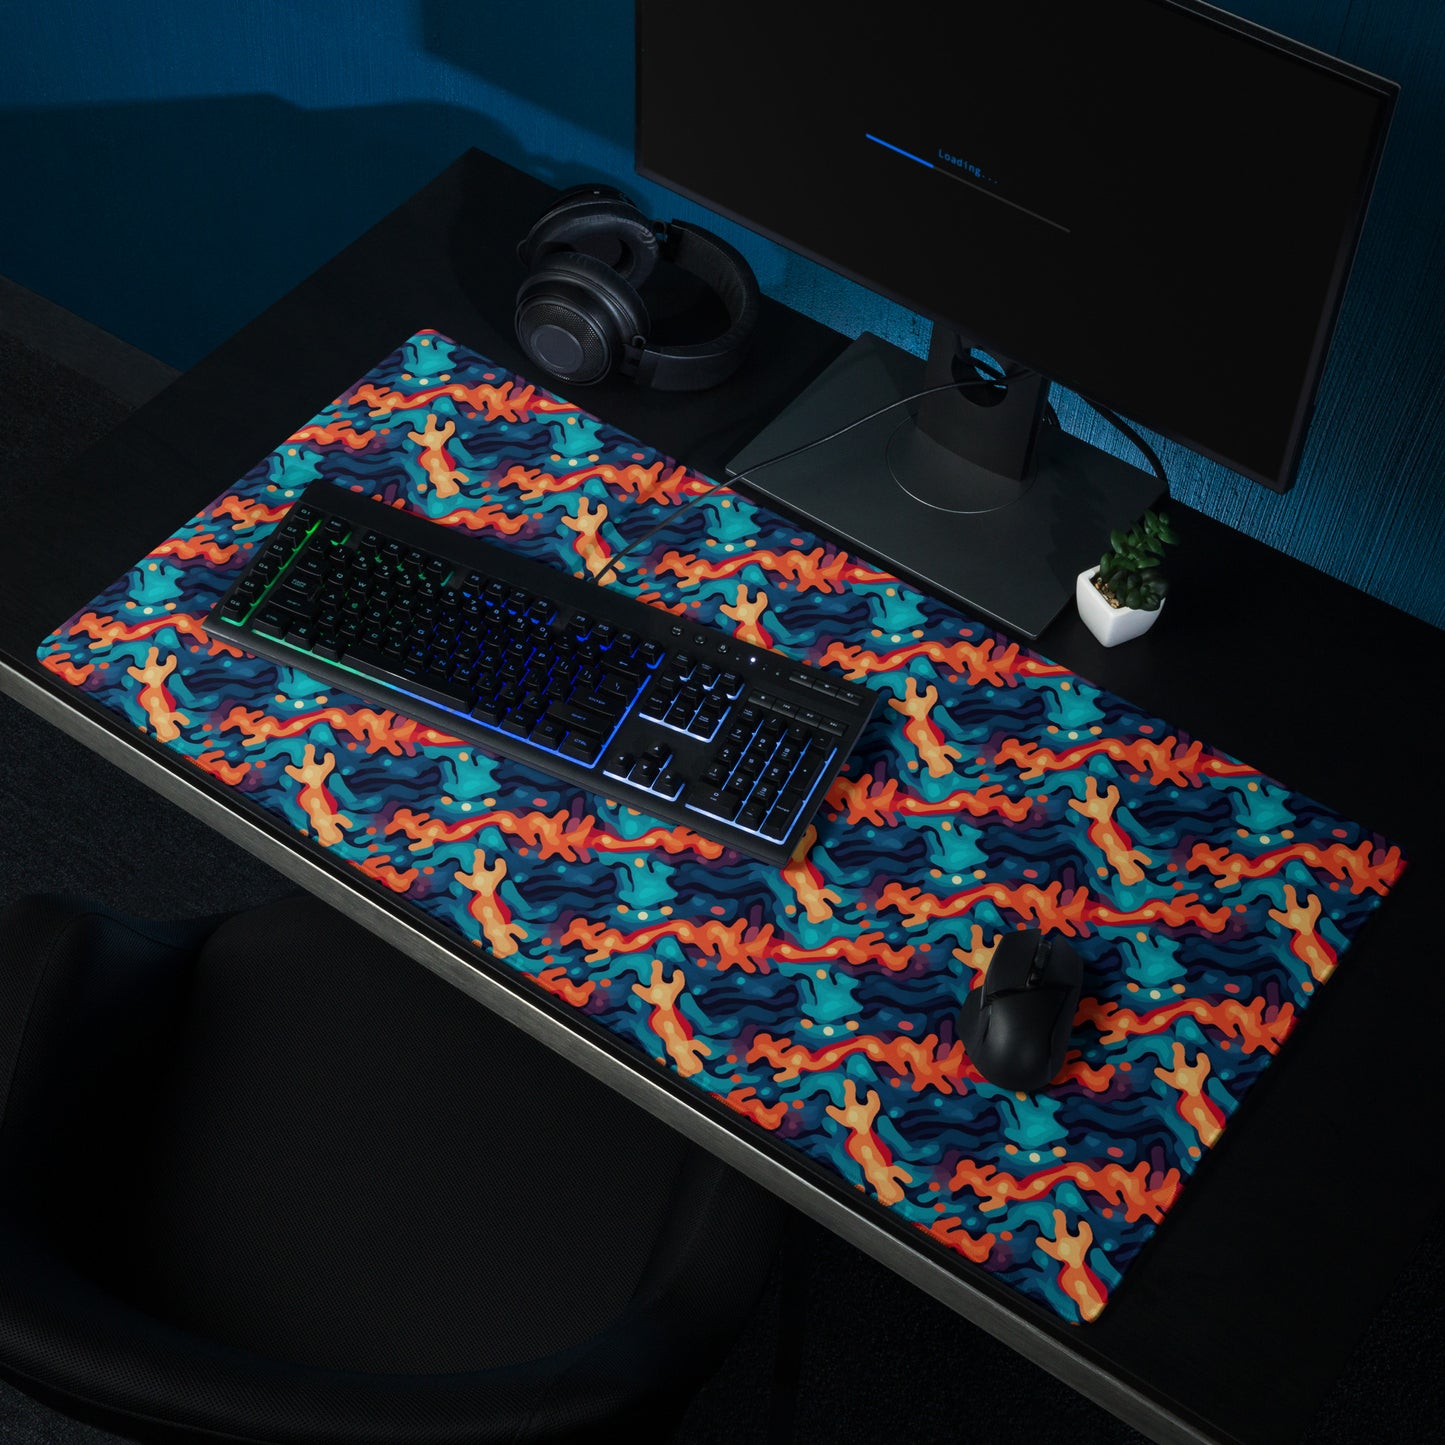 A 36" x 18" desk pad with a wavy woven pattern on it shown on a desk setup. Red and Blue in color.